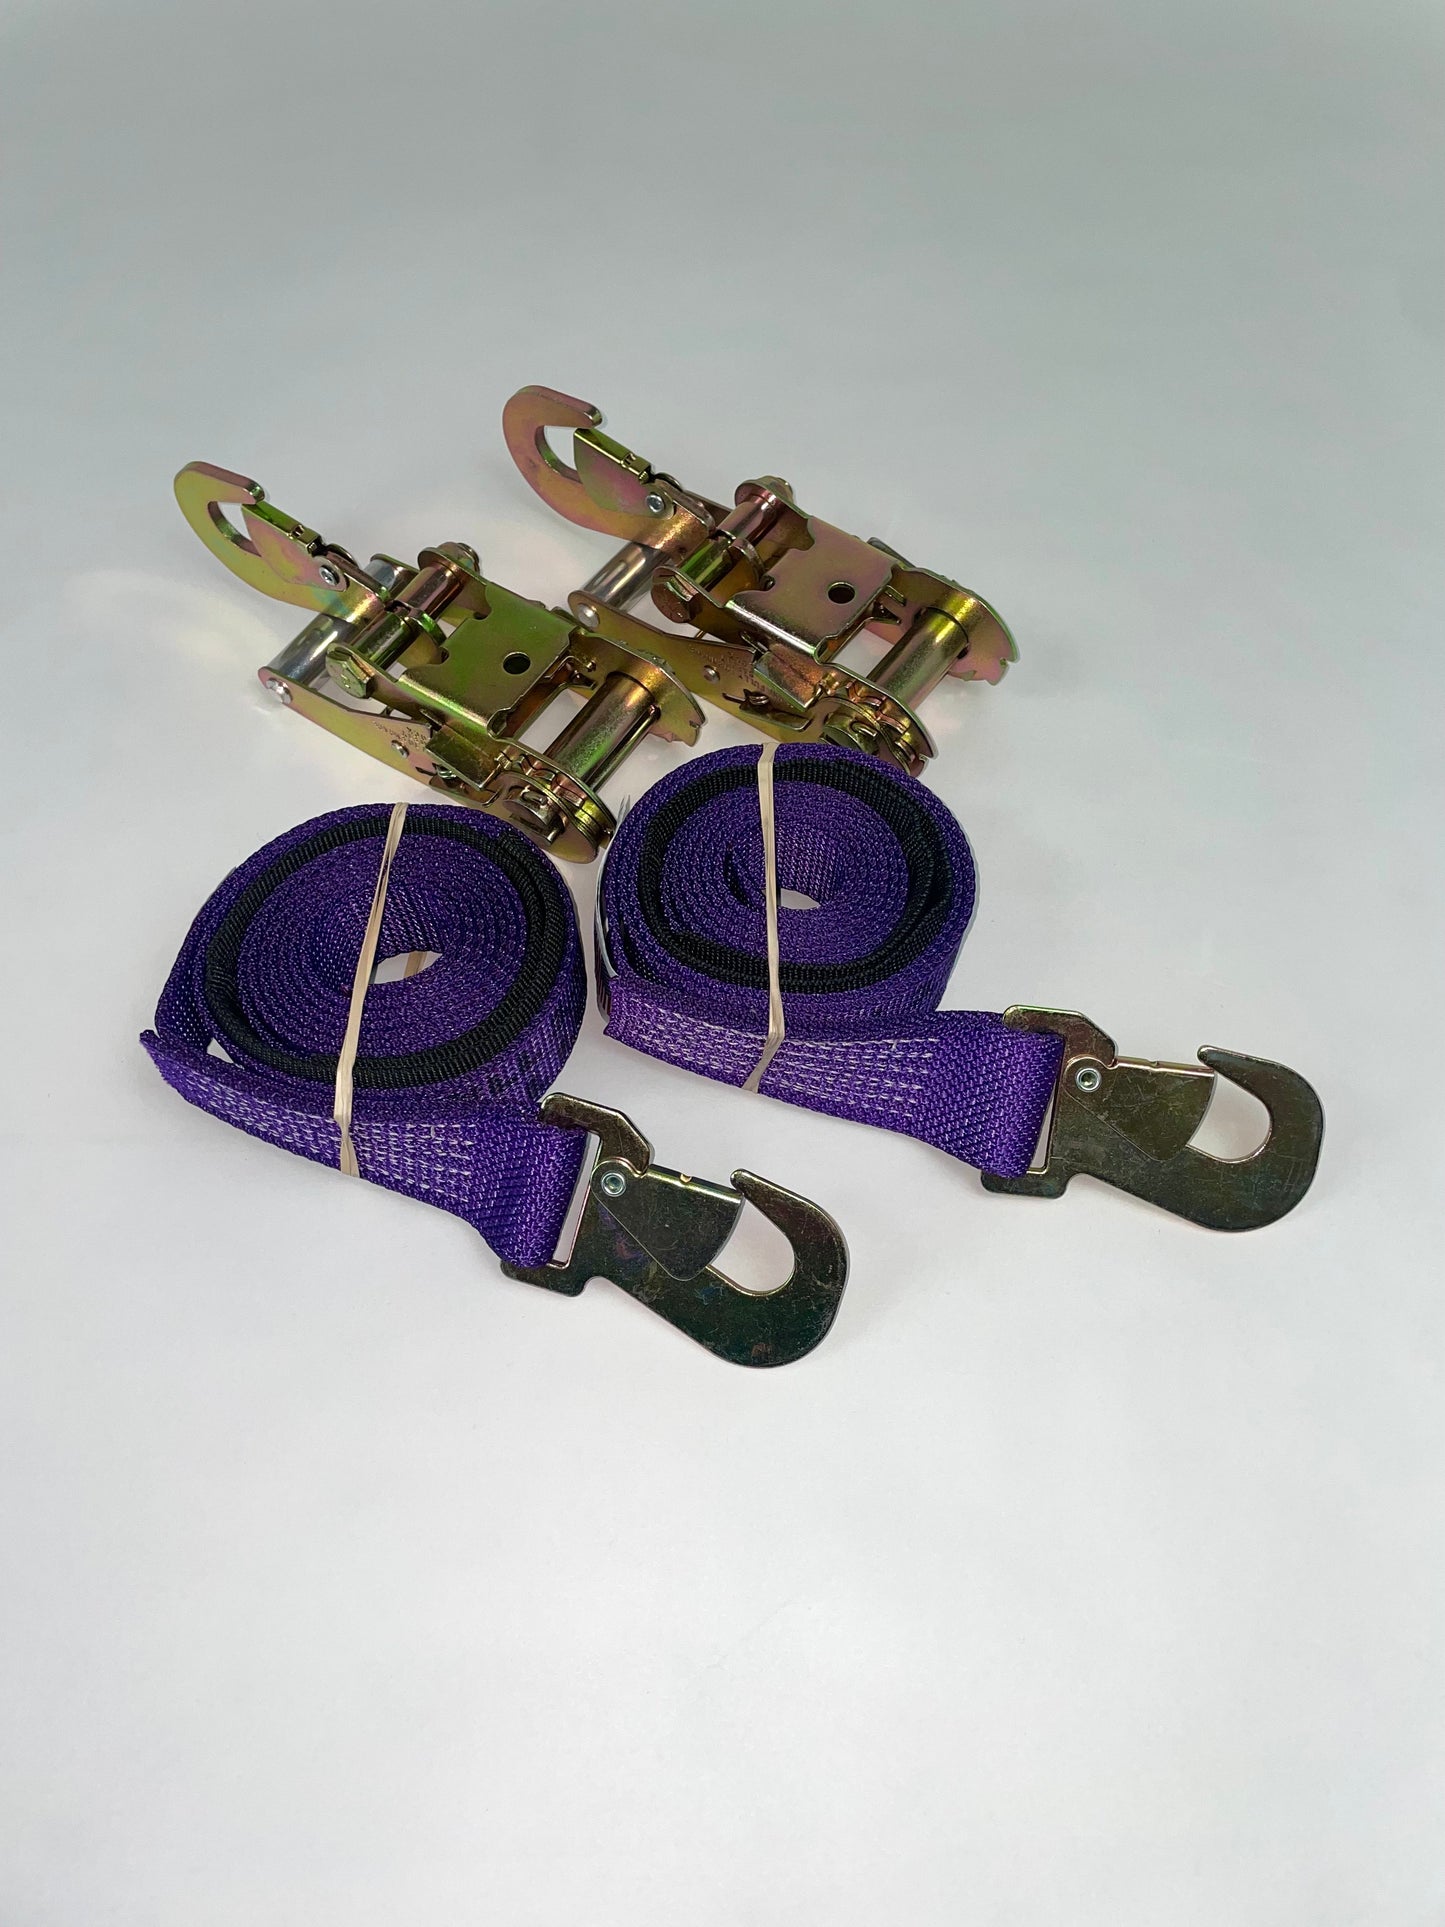 2 Pack Snap Hook Straps with Snap Hook Ratchet